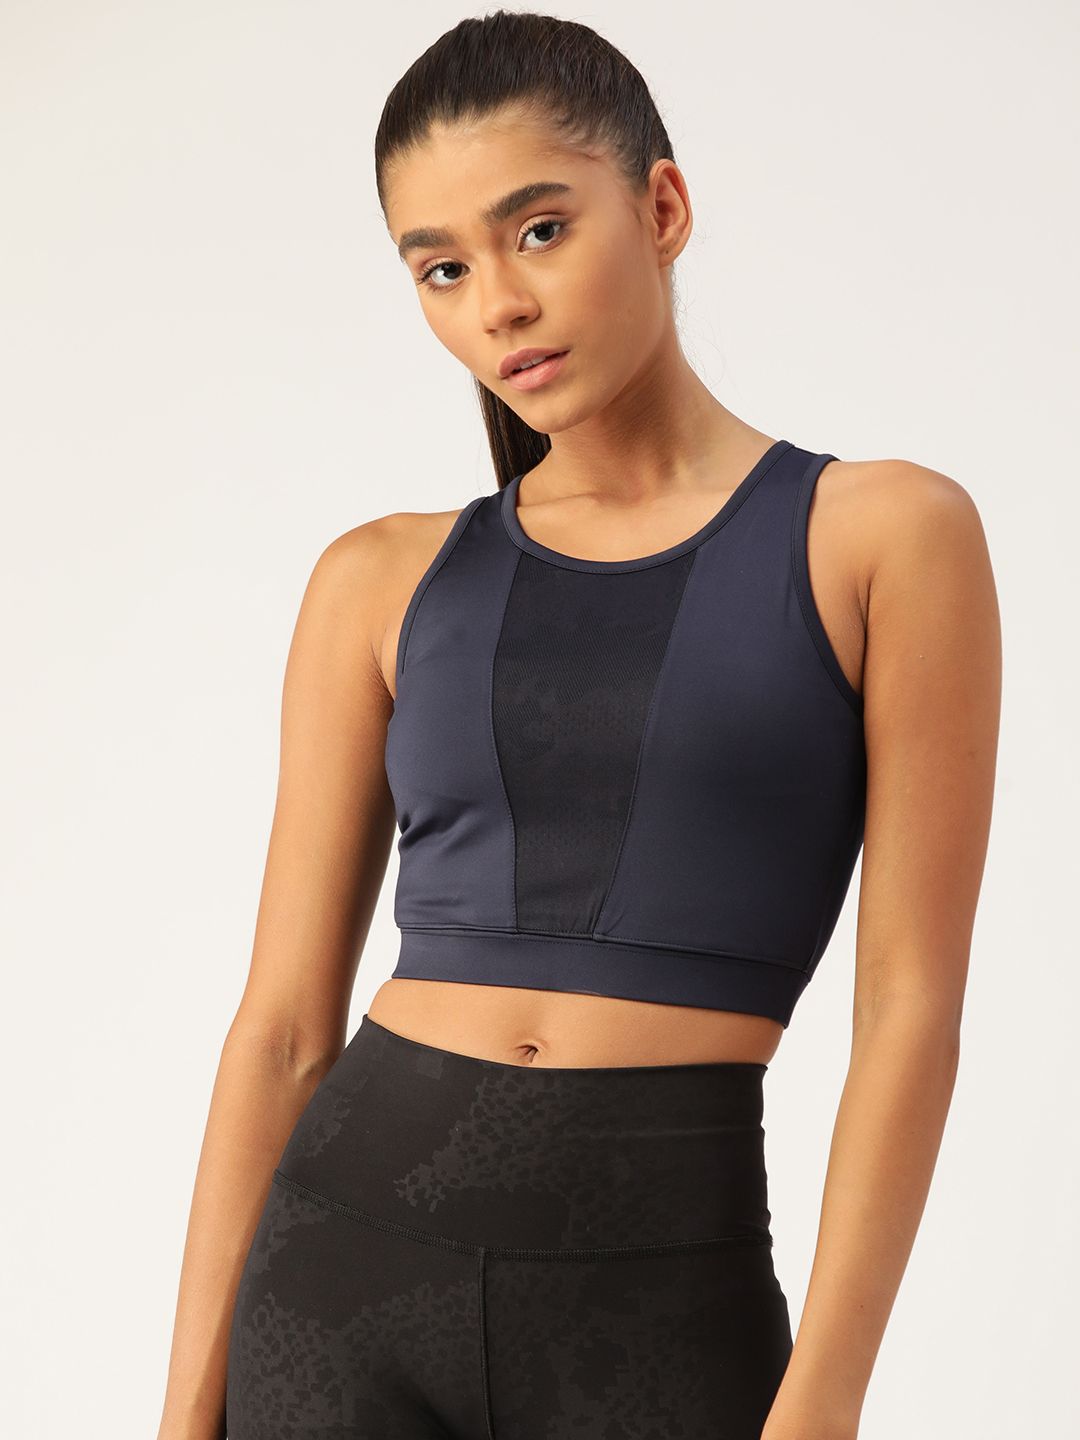 KICA Navy Blue High Support Sports Bra - Rapid Dry Price in India